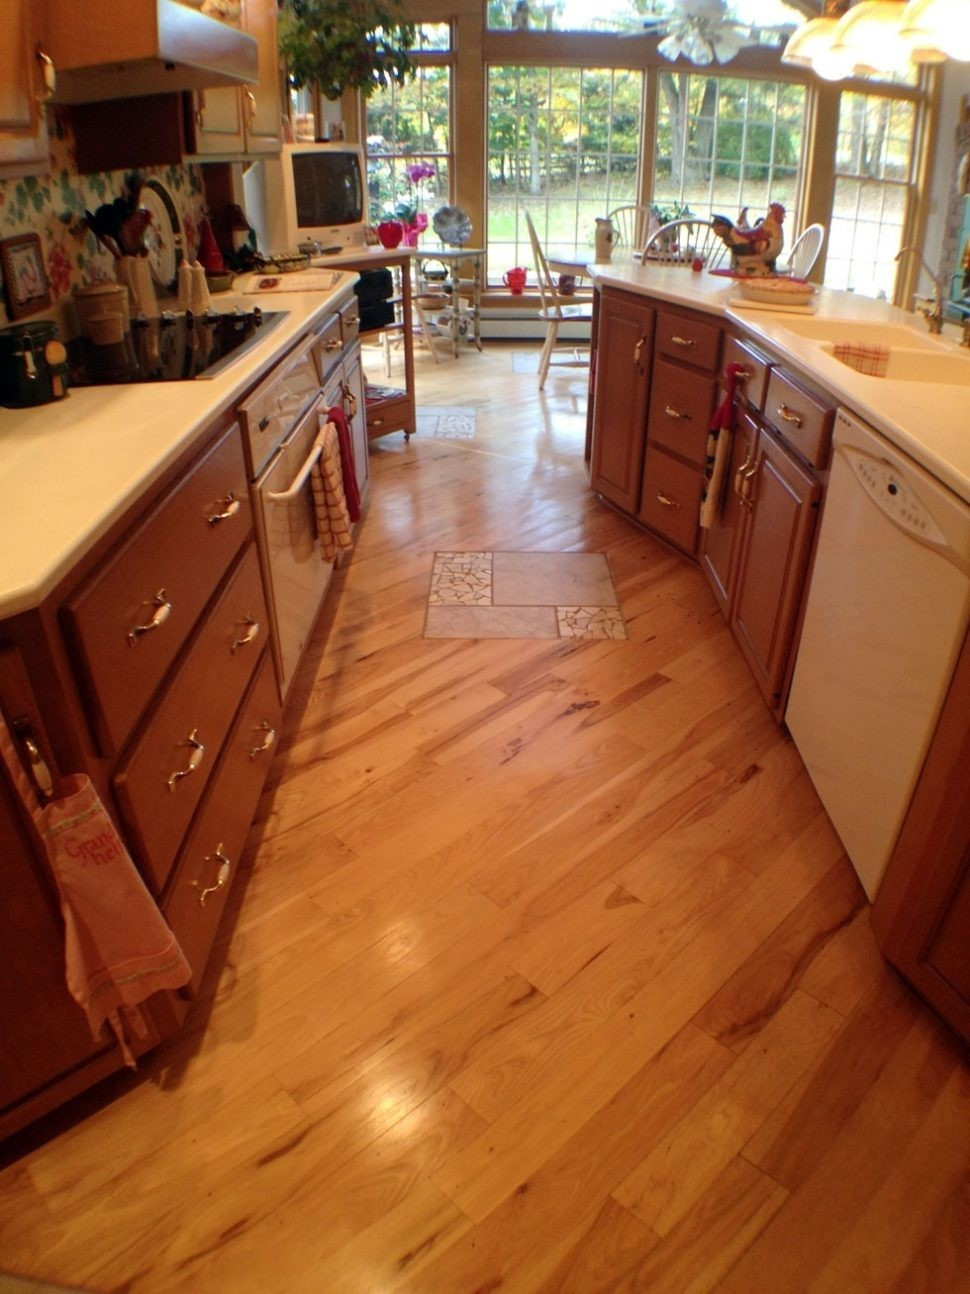 12 Wonderful Stained Hardwood Floors Pictures 2023 free download stained hardwood floors pictures of 17 new cost of hardwood floor installation pics dizpos com with regard to 16 lovely s hardwood floor installation cost